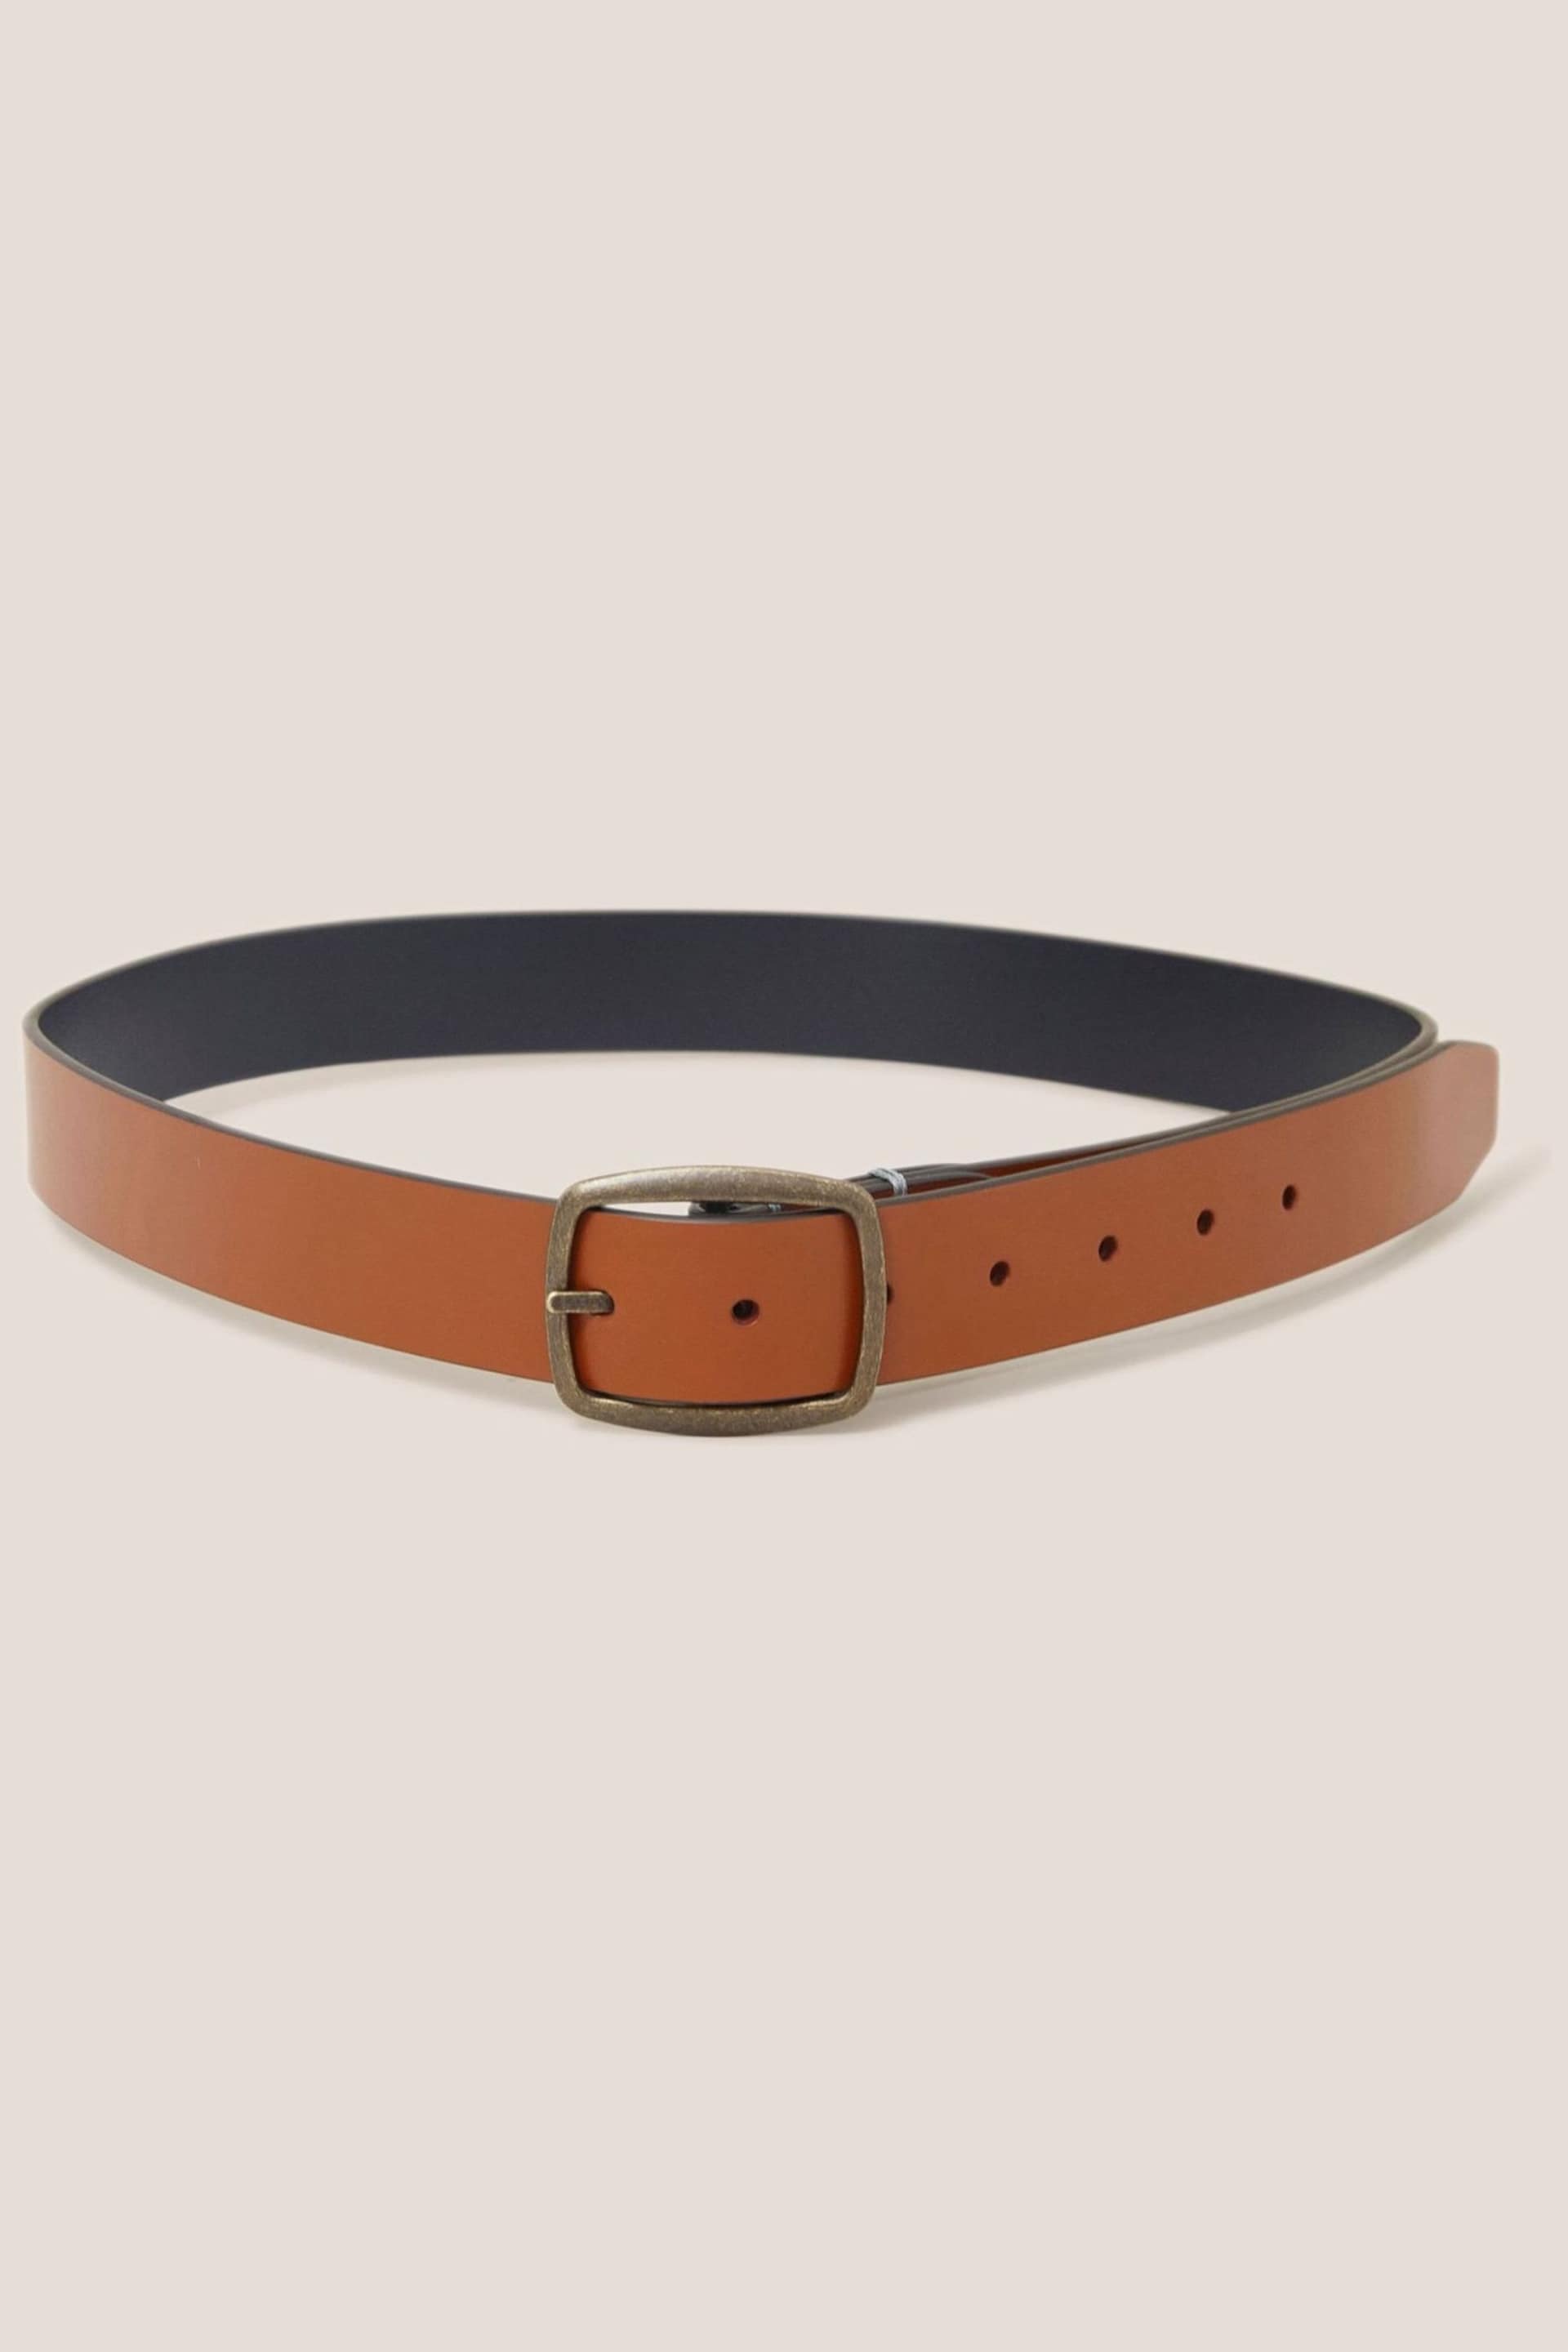 White Stuff Natural Reversible Leather Belt - Image 2 of 2